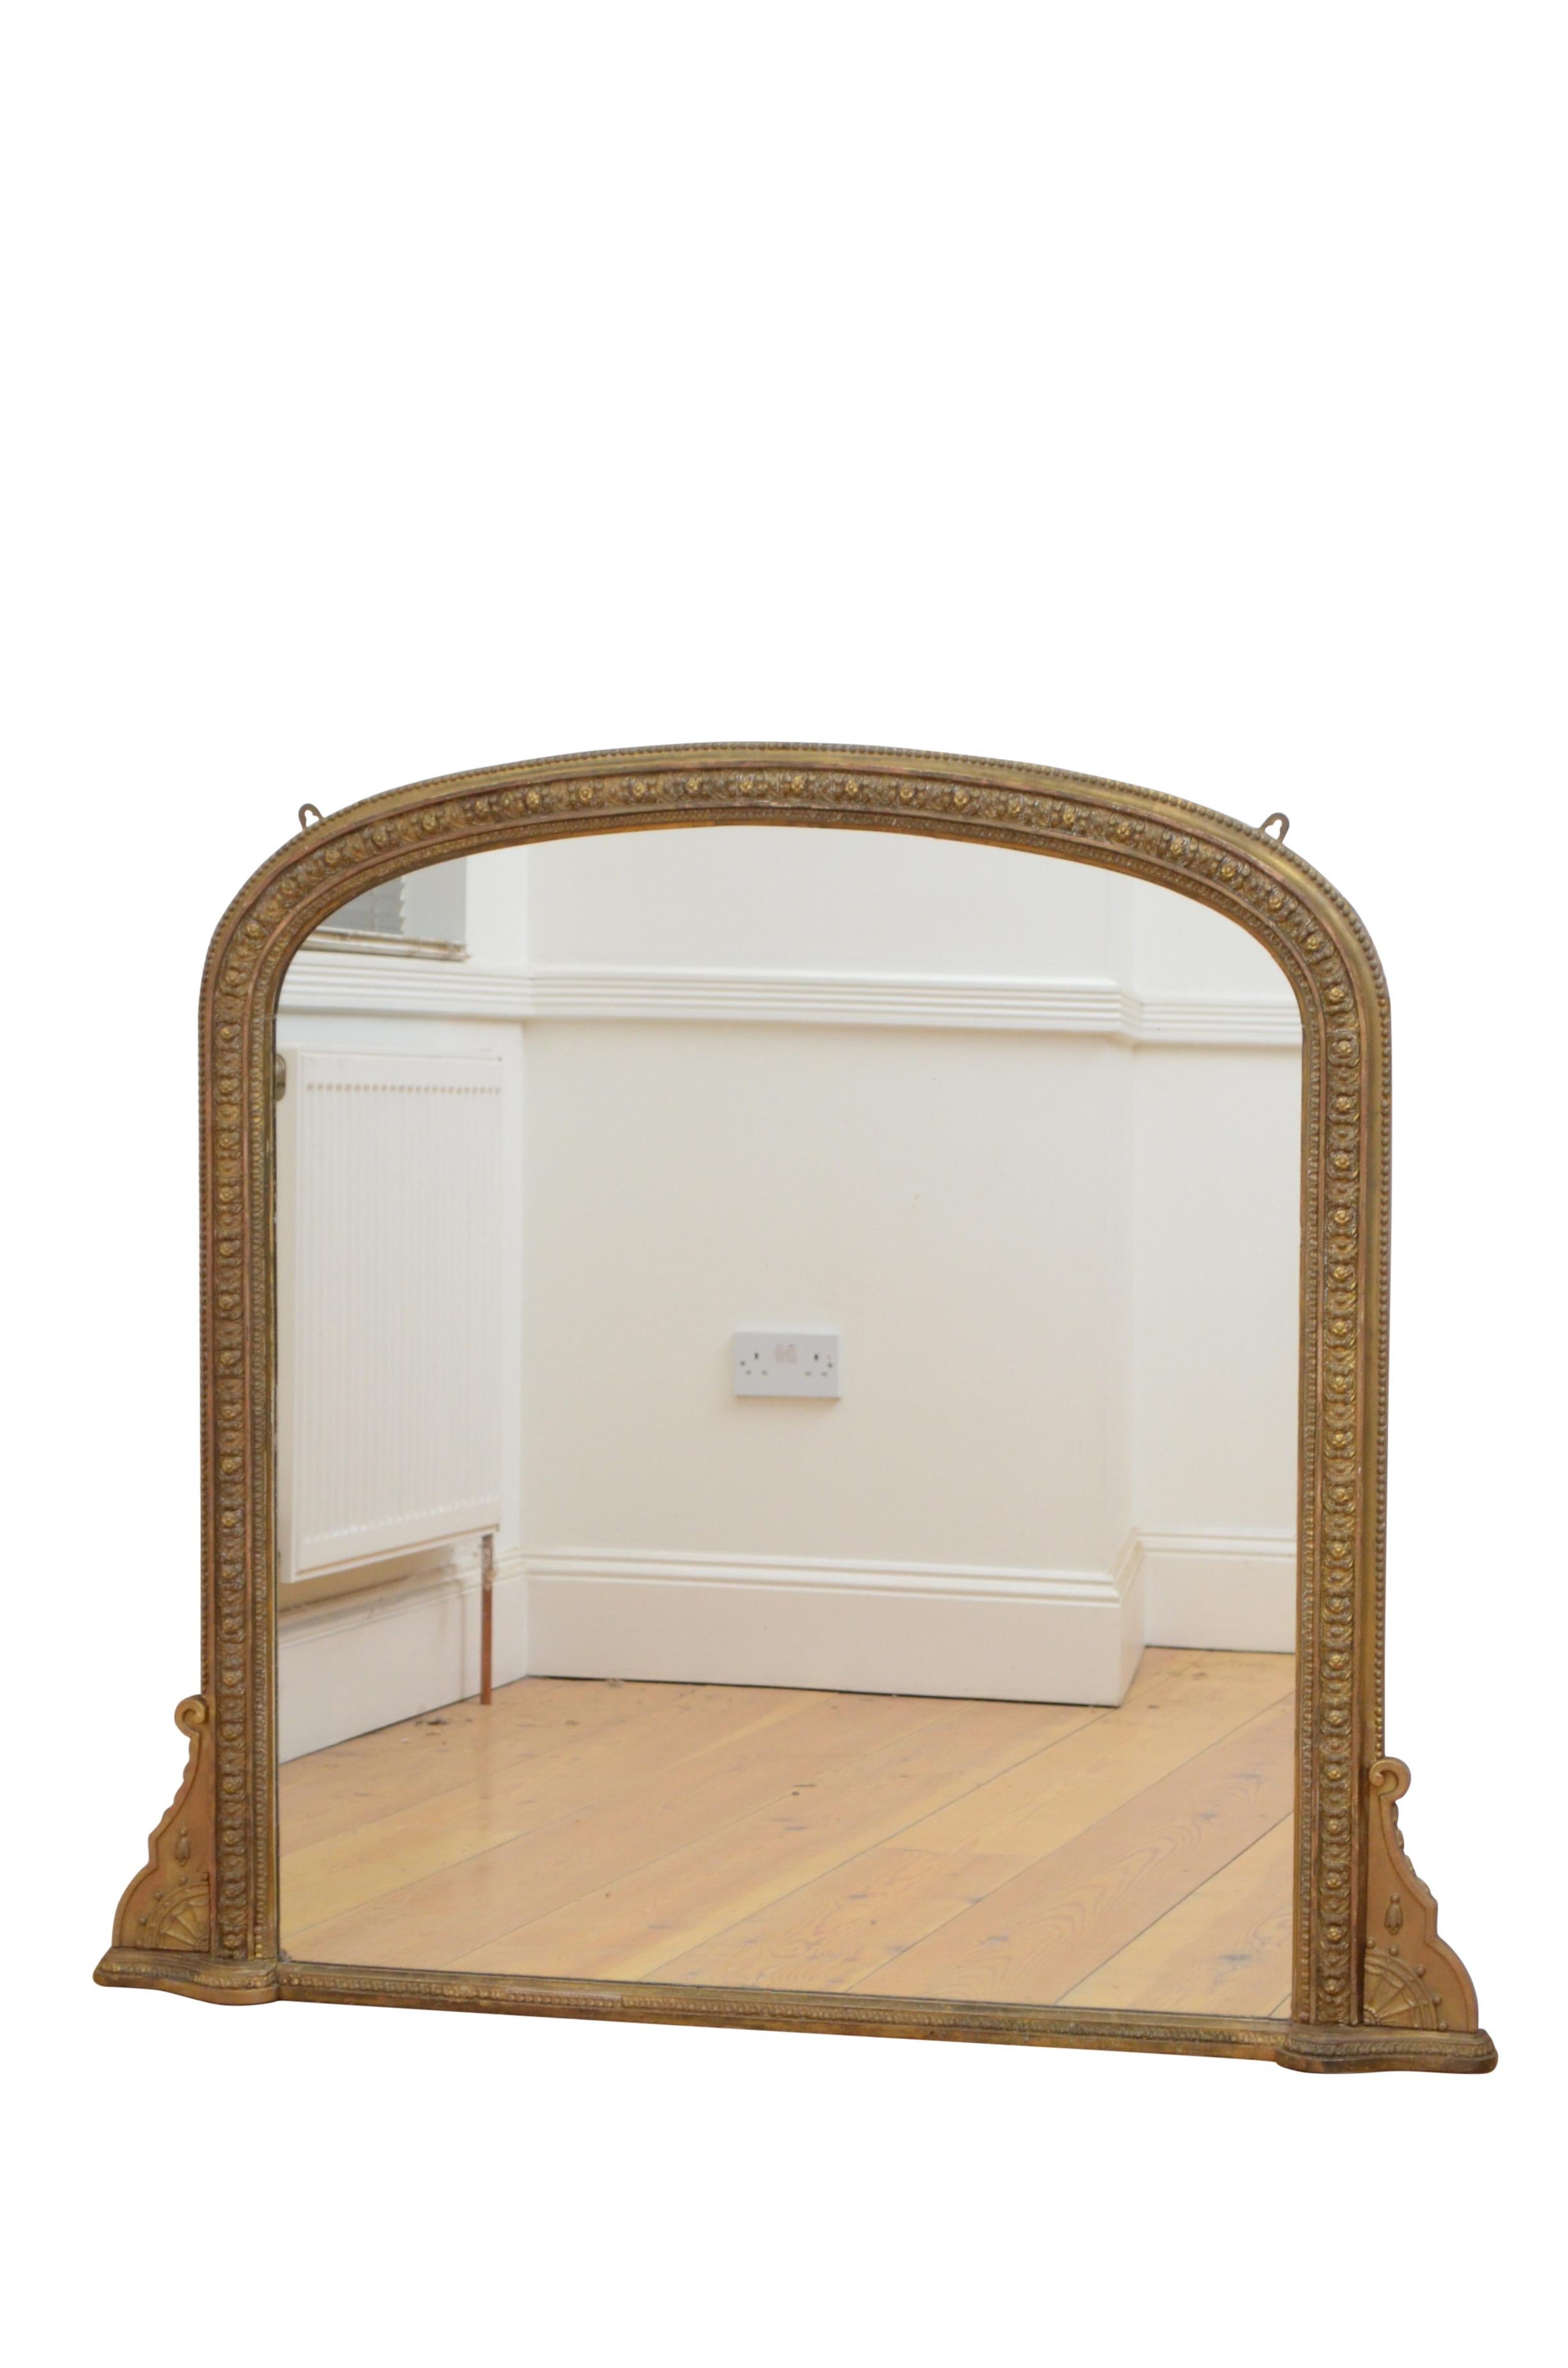 K0578 Victorian gilded wall mirror of low design, having carved frame with beaded edge and scrolls to the base. This antique mirror retains original gilt with touching up over the years and original backboards fitted with hanging brackets, all in